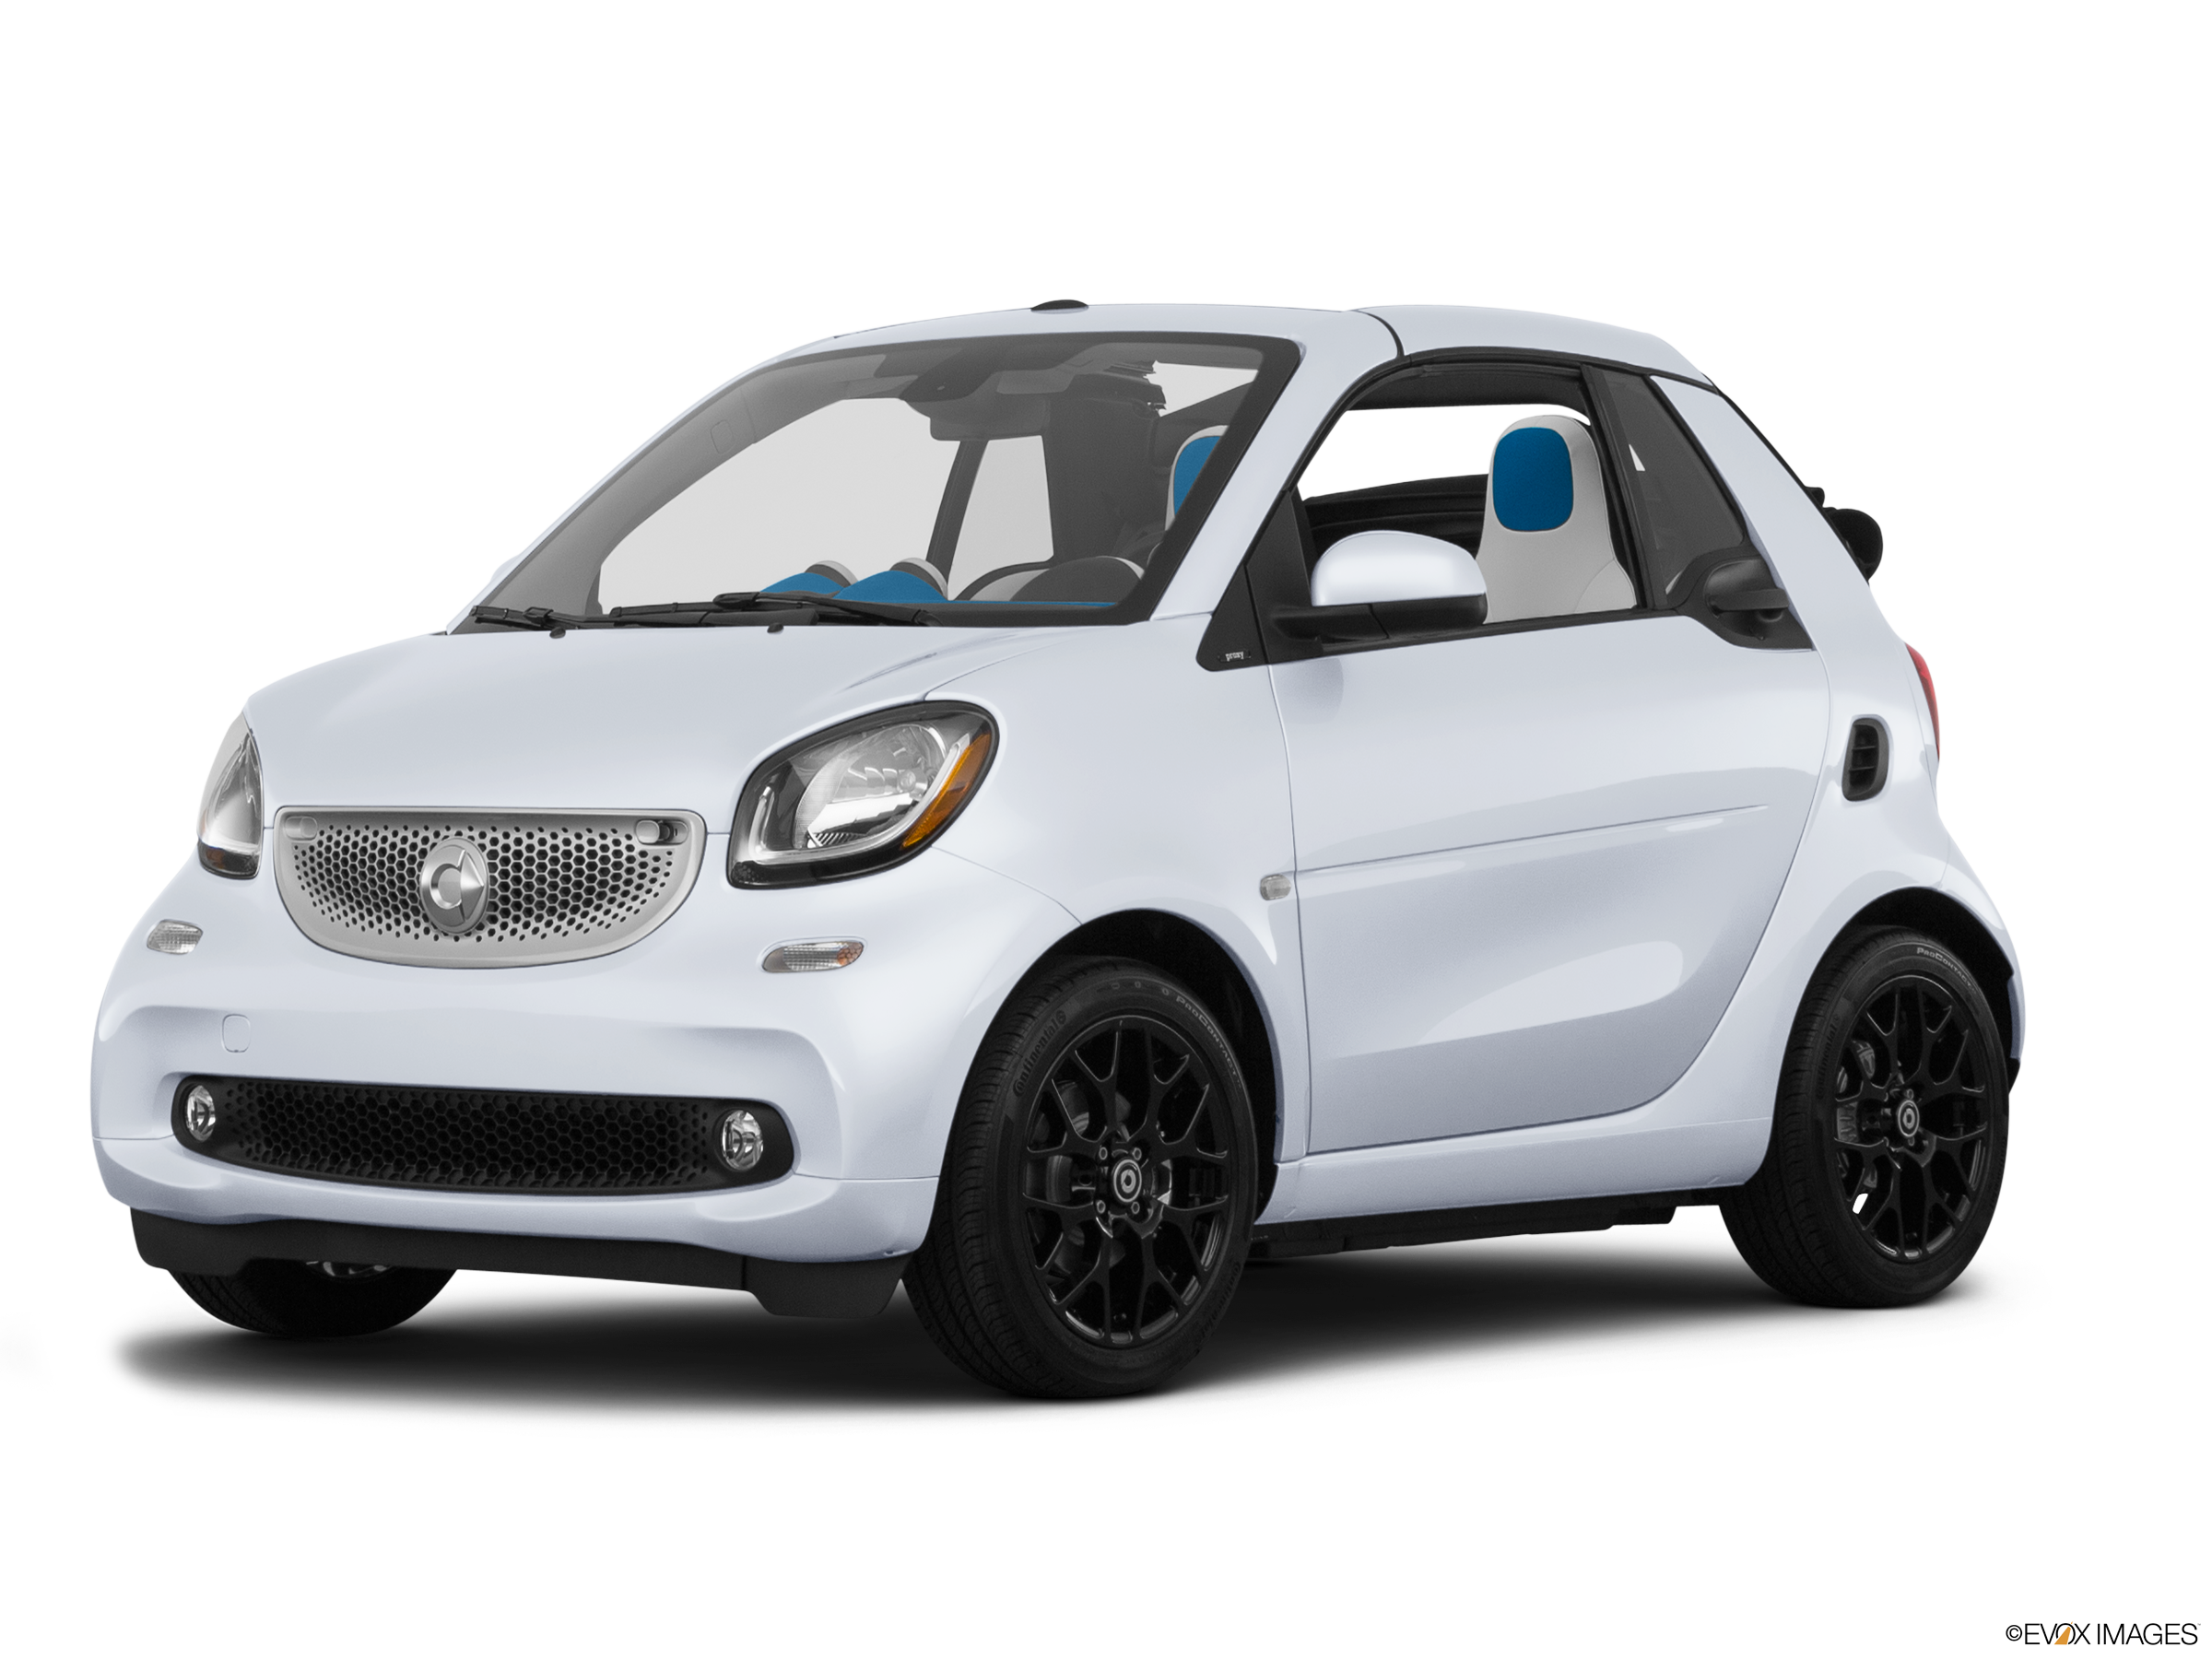 2017 smart fortwo Review, Ratings, Specs, Prices, and Photos - The